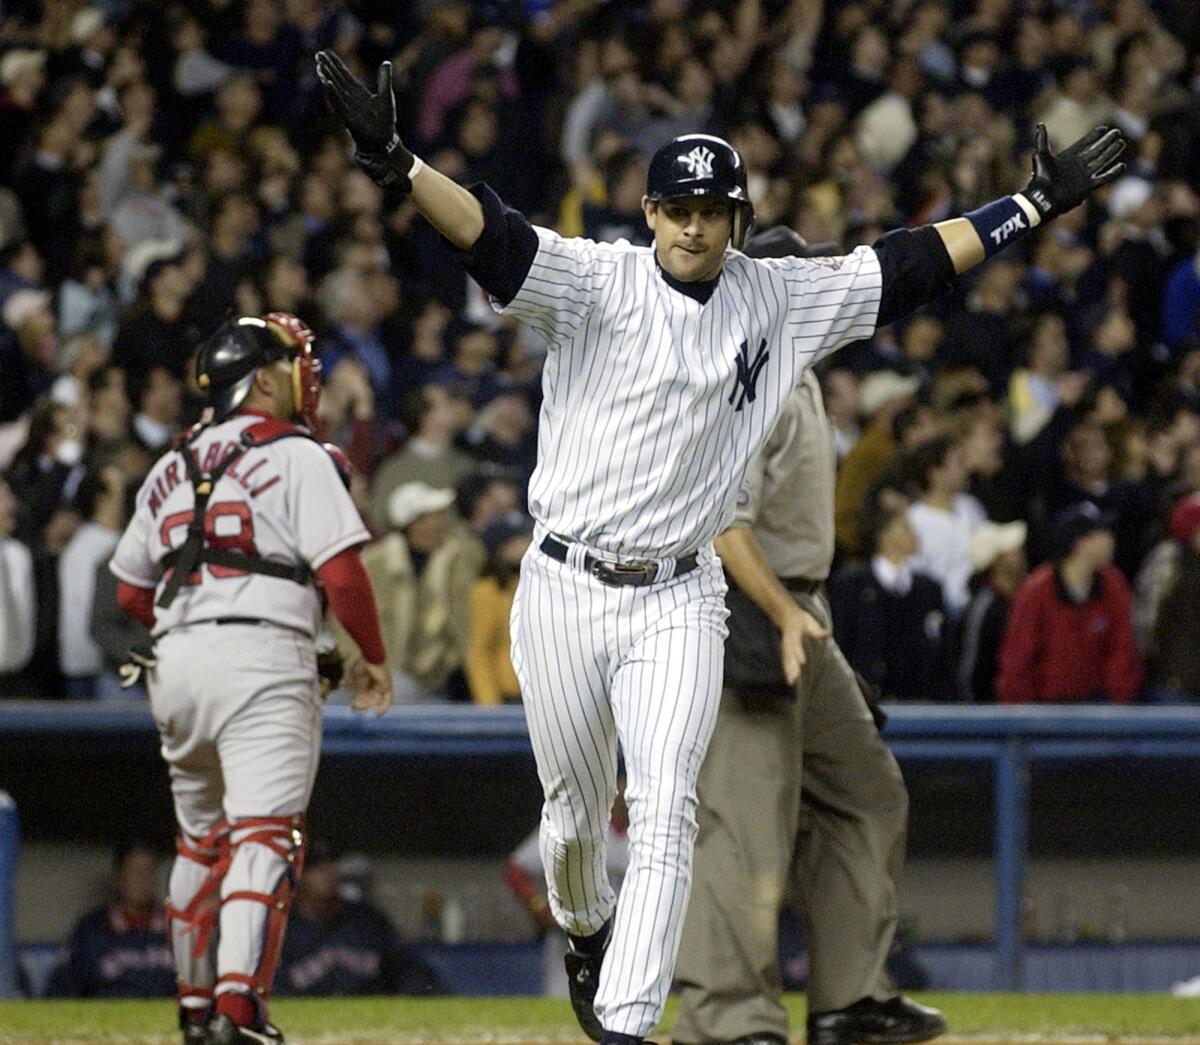 Aaron Boone celebrates after hitting a game-winning home run against the Red Sox in the 11th inning of Game 7 of the ALCS in 2003.